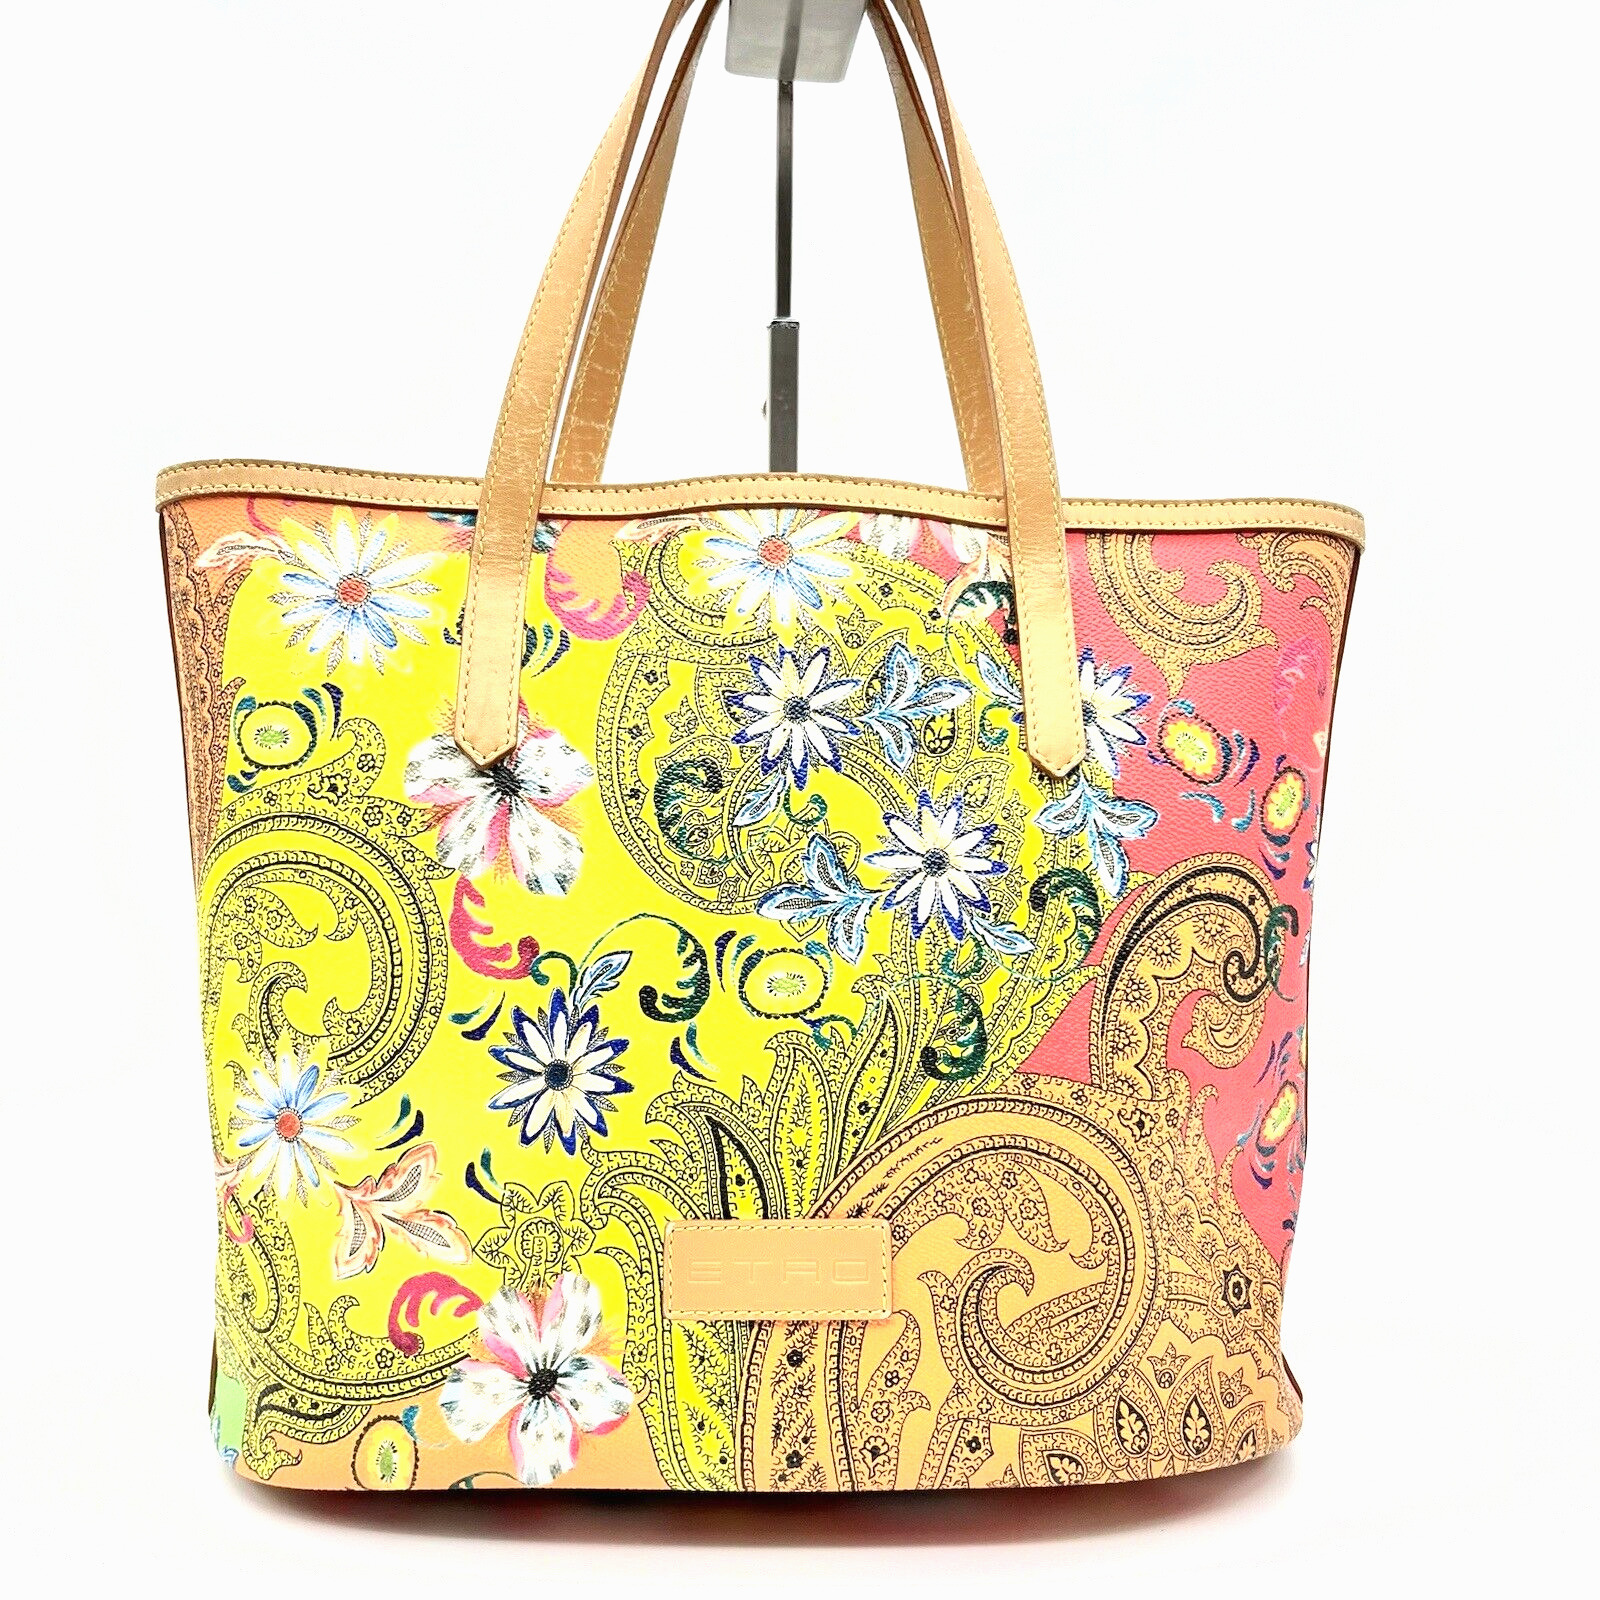 RARE Etro tote bag Multicolor Flower Paisley Used From Japan